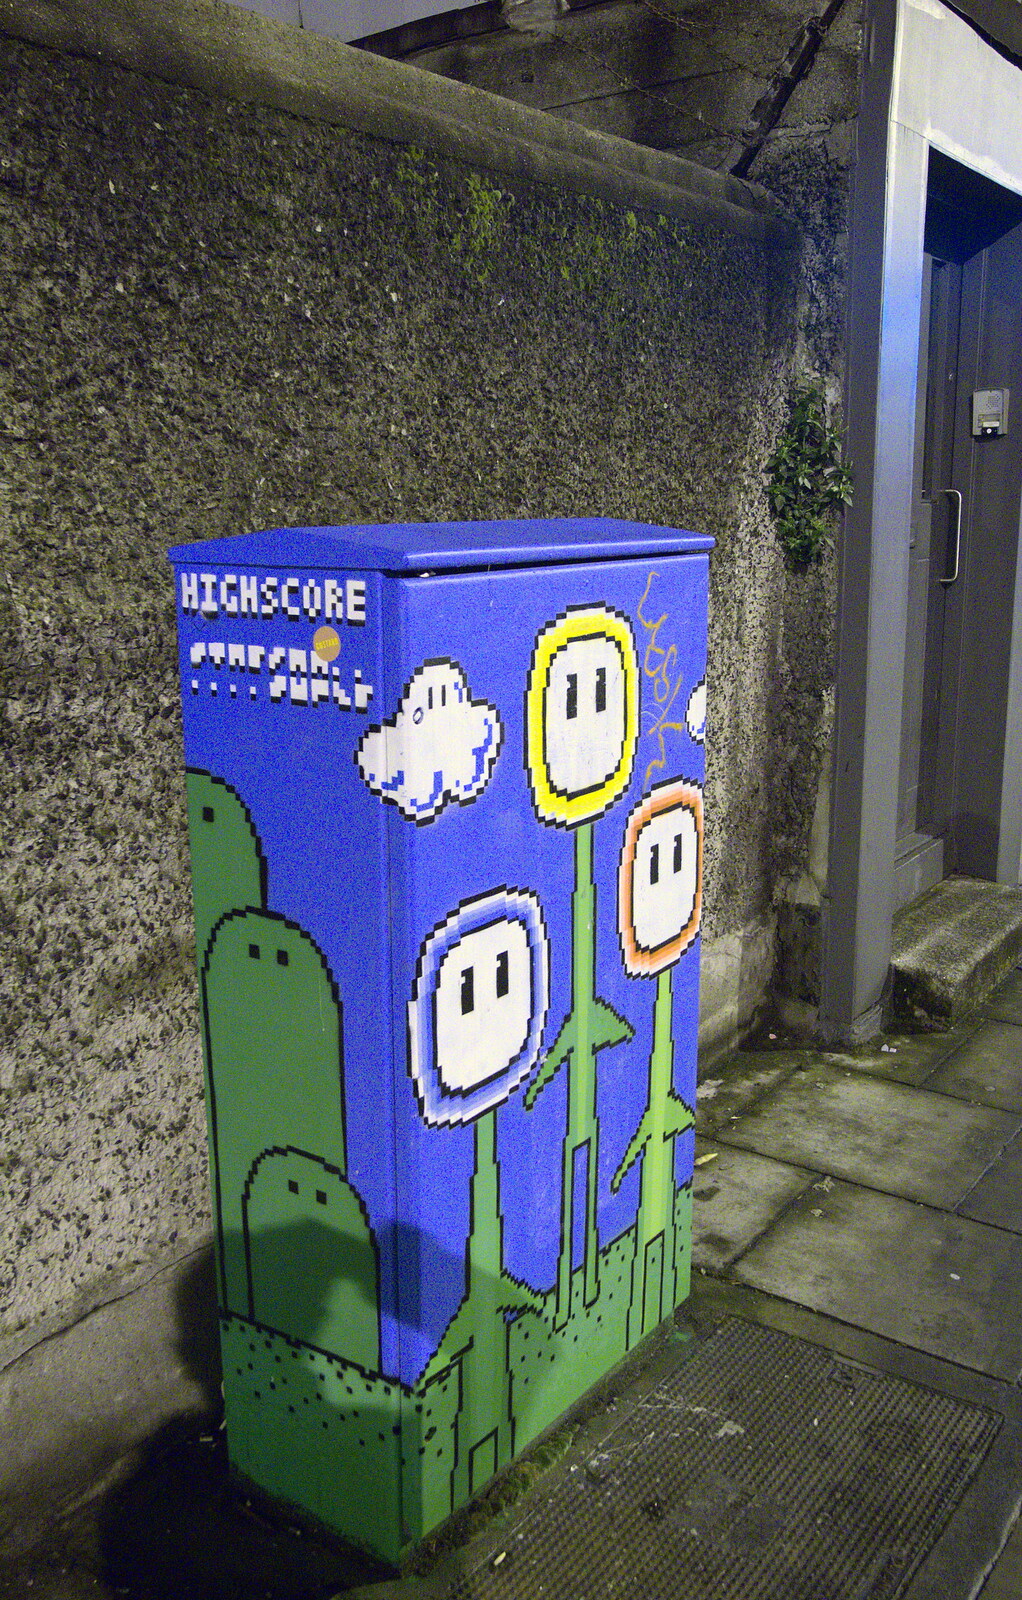 A cabinet gets the street art treatment from A Night on the Lash, Dublin, Ireland - 14th December 2012